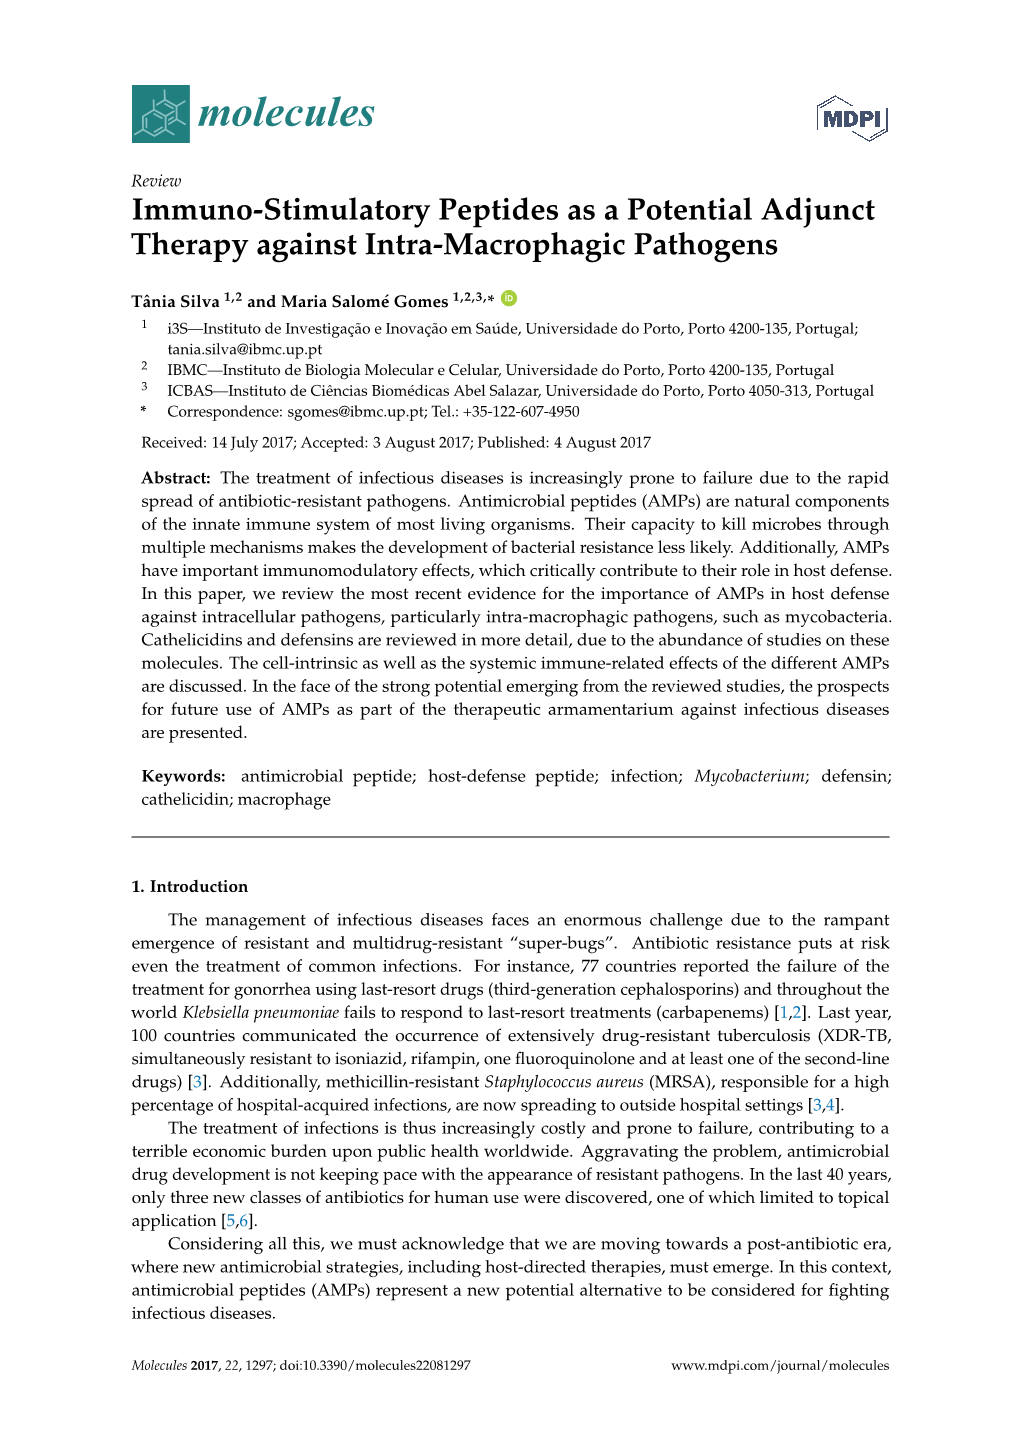 Immuno-Stimulatory Peptides As a Potential Adjunct Therapy Against Intra-Macrophagic Pathogens